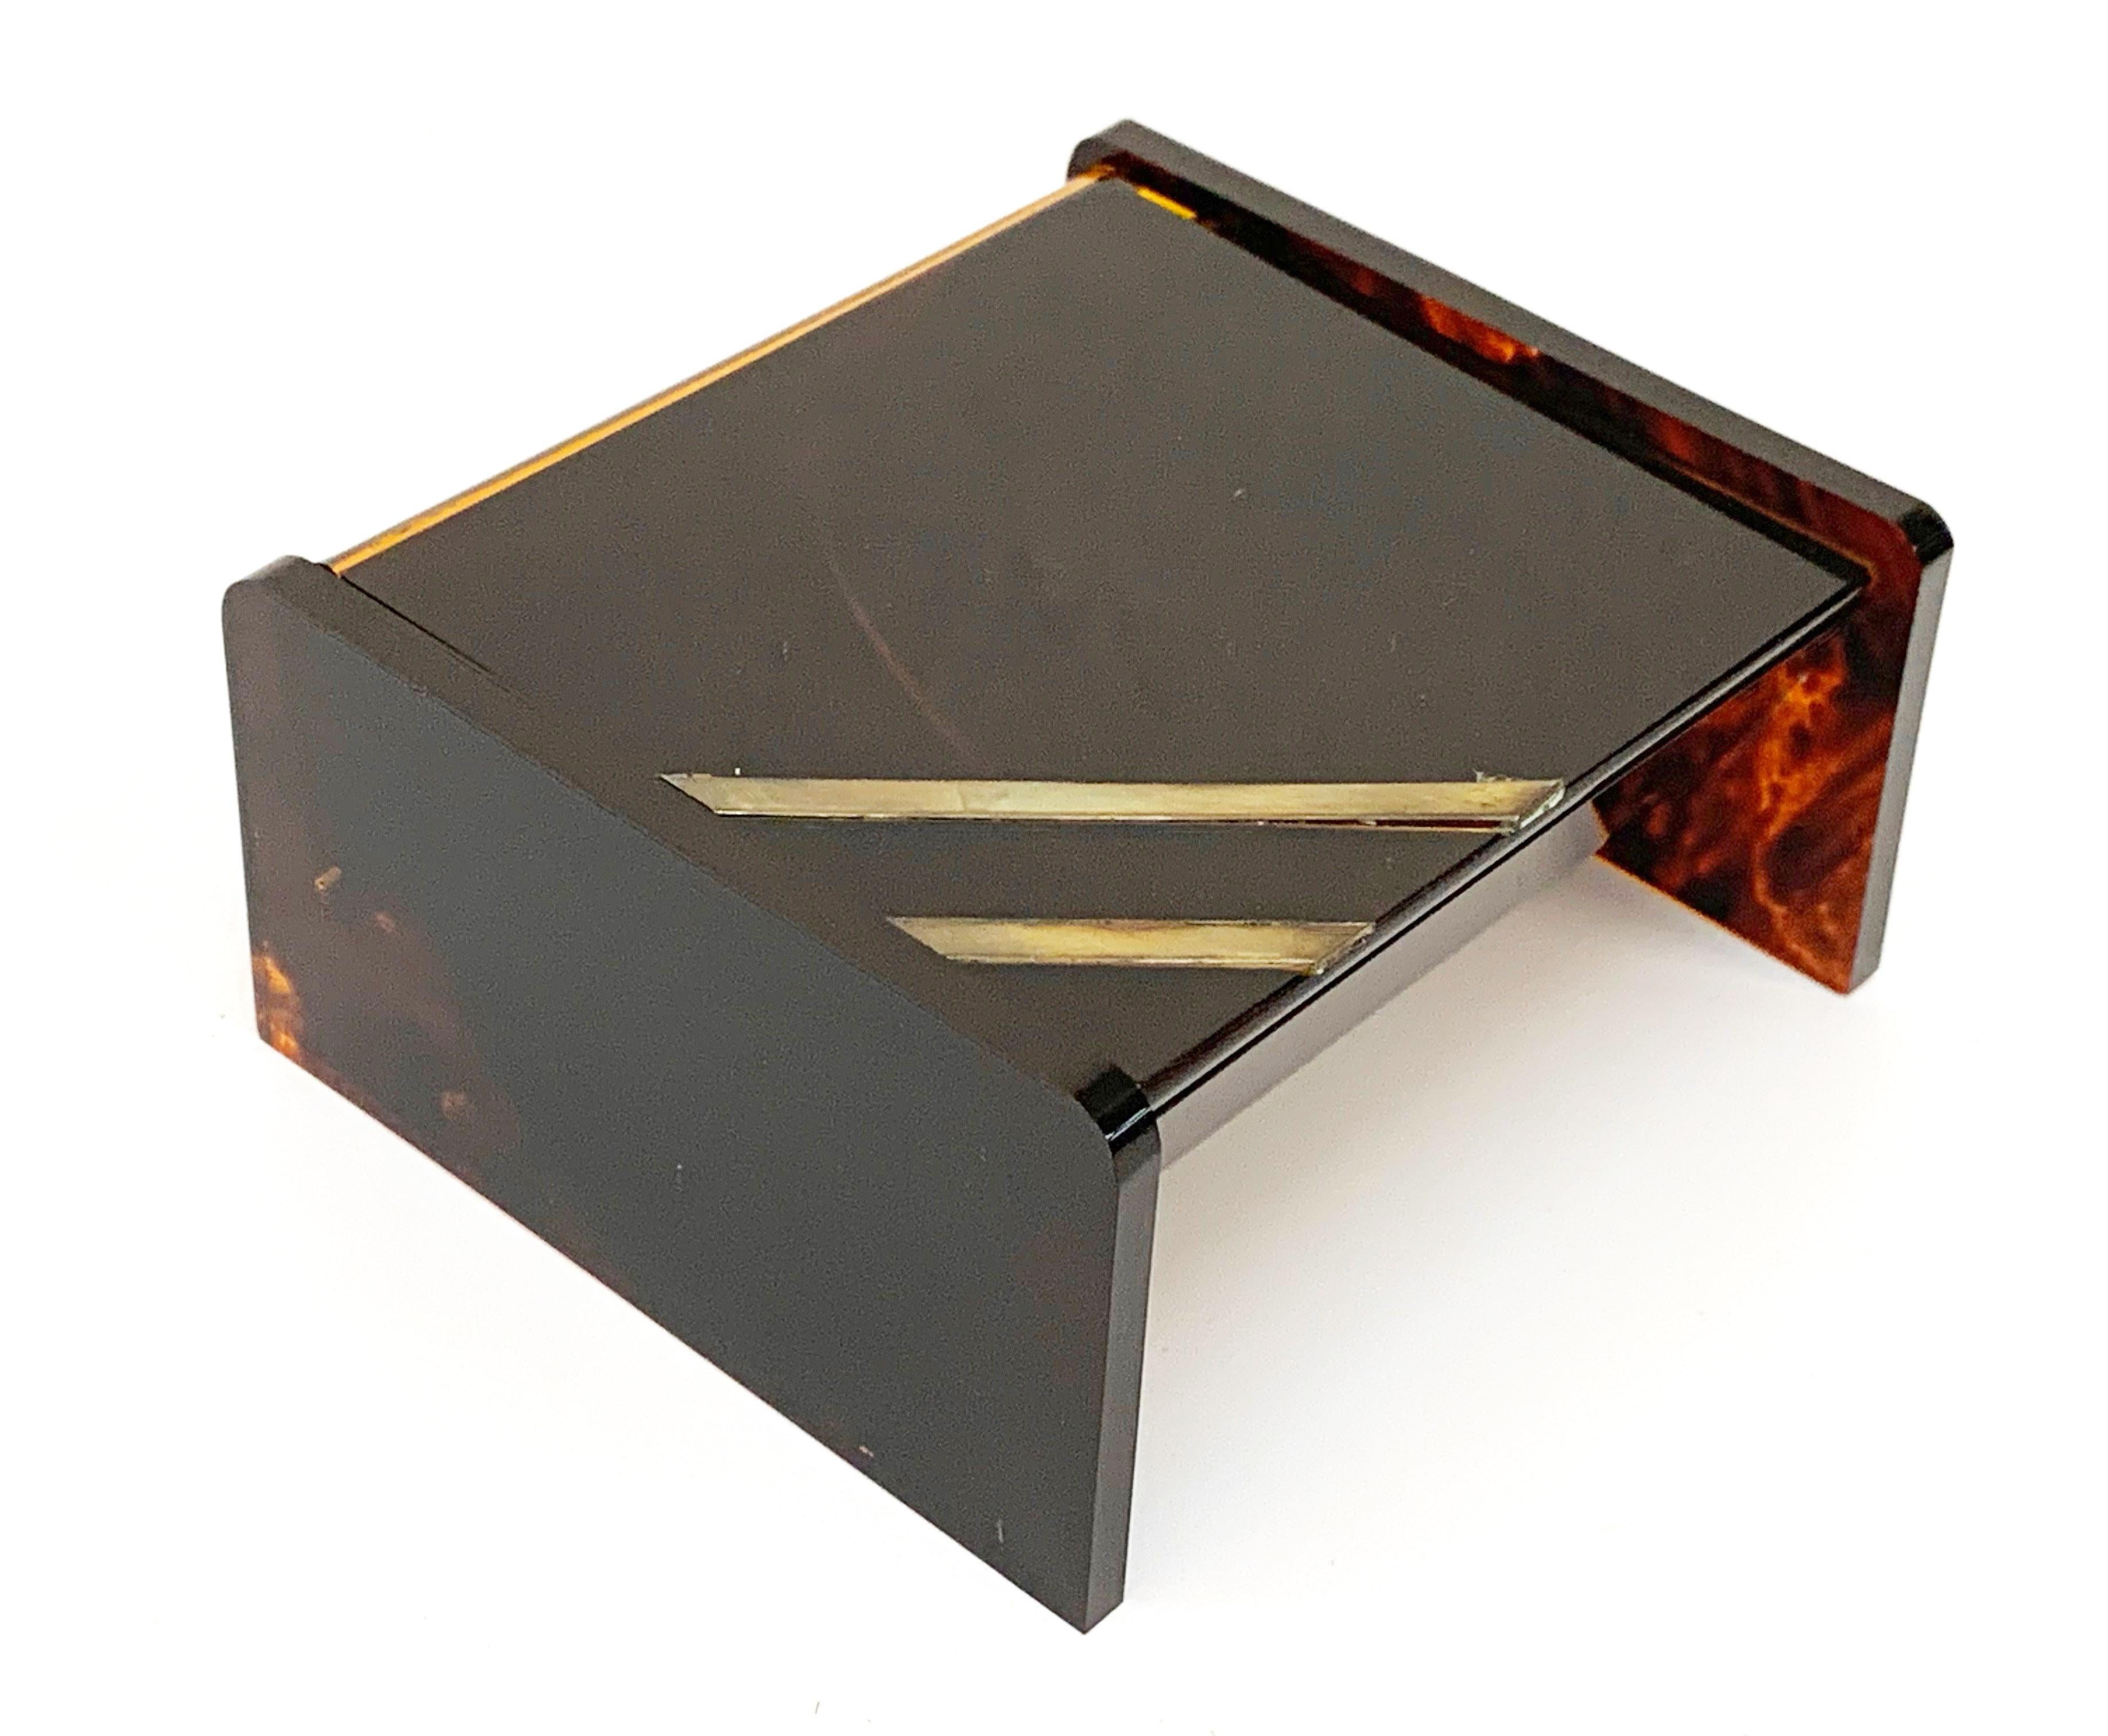 Wonderful and tiny Christian Dior style jewellery case, it is made of Lucite, Tortoise plexiglass and brass. 

It was produced in France during 1970s and in its simplicity and elegance represents the essence of the design of the period.

A great